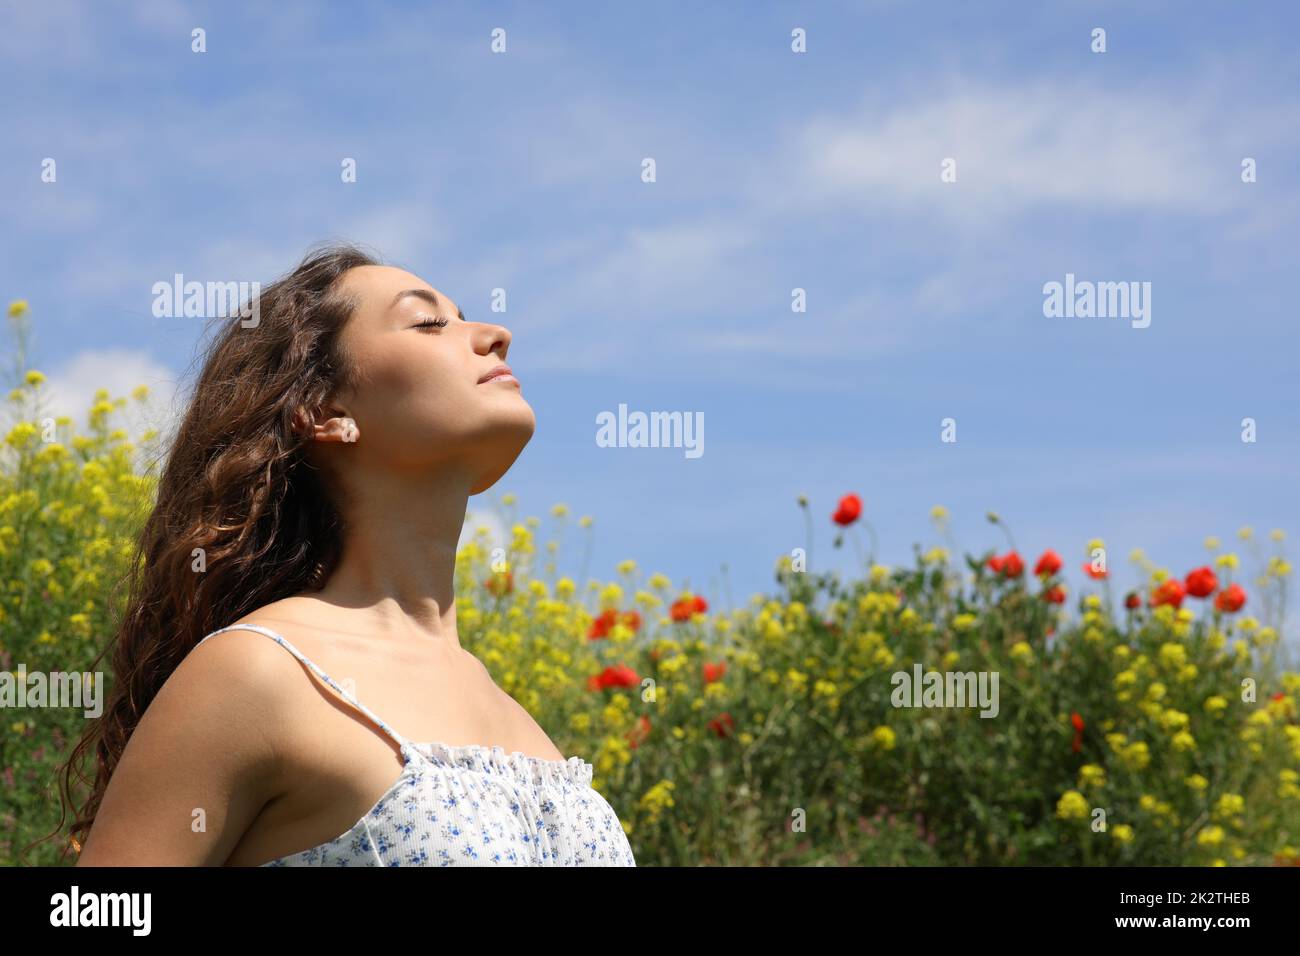 Woman breathing fresh air in a flowers field Stock Photo